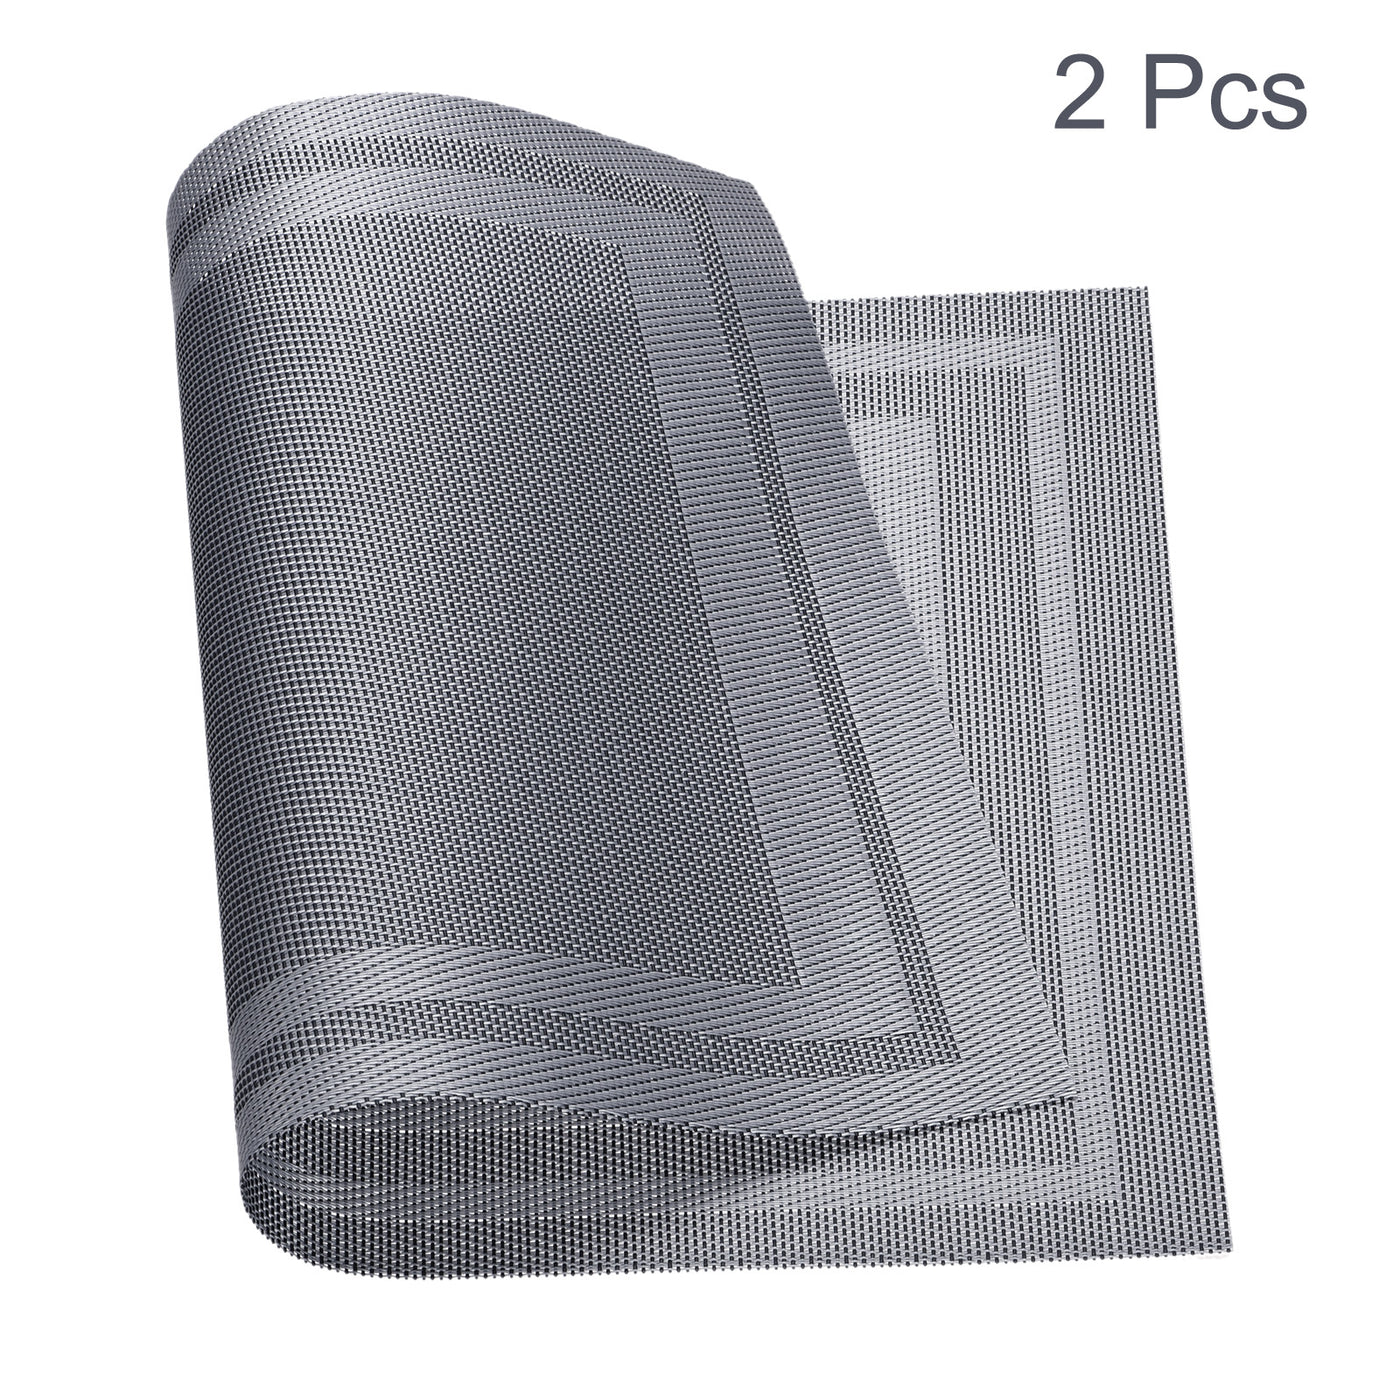 uxcell Uxcell Place Mats 450x300mm 2pcs PVC Table Washable Woven Placemat, Gray